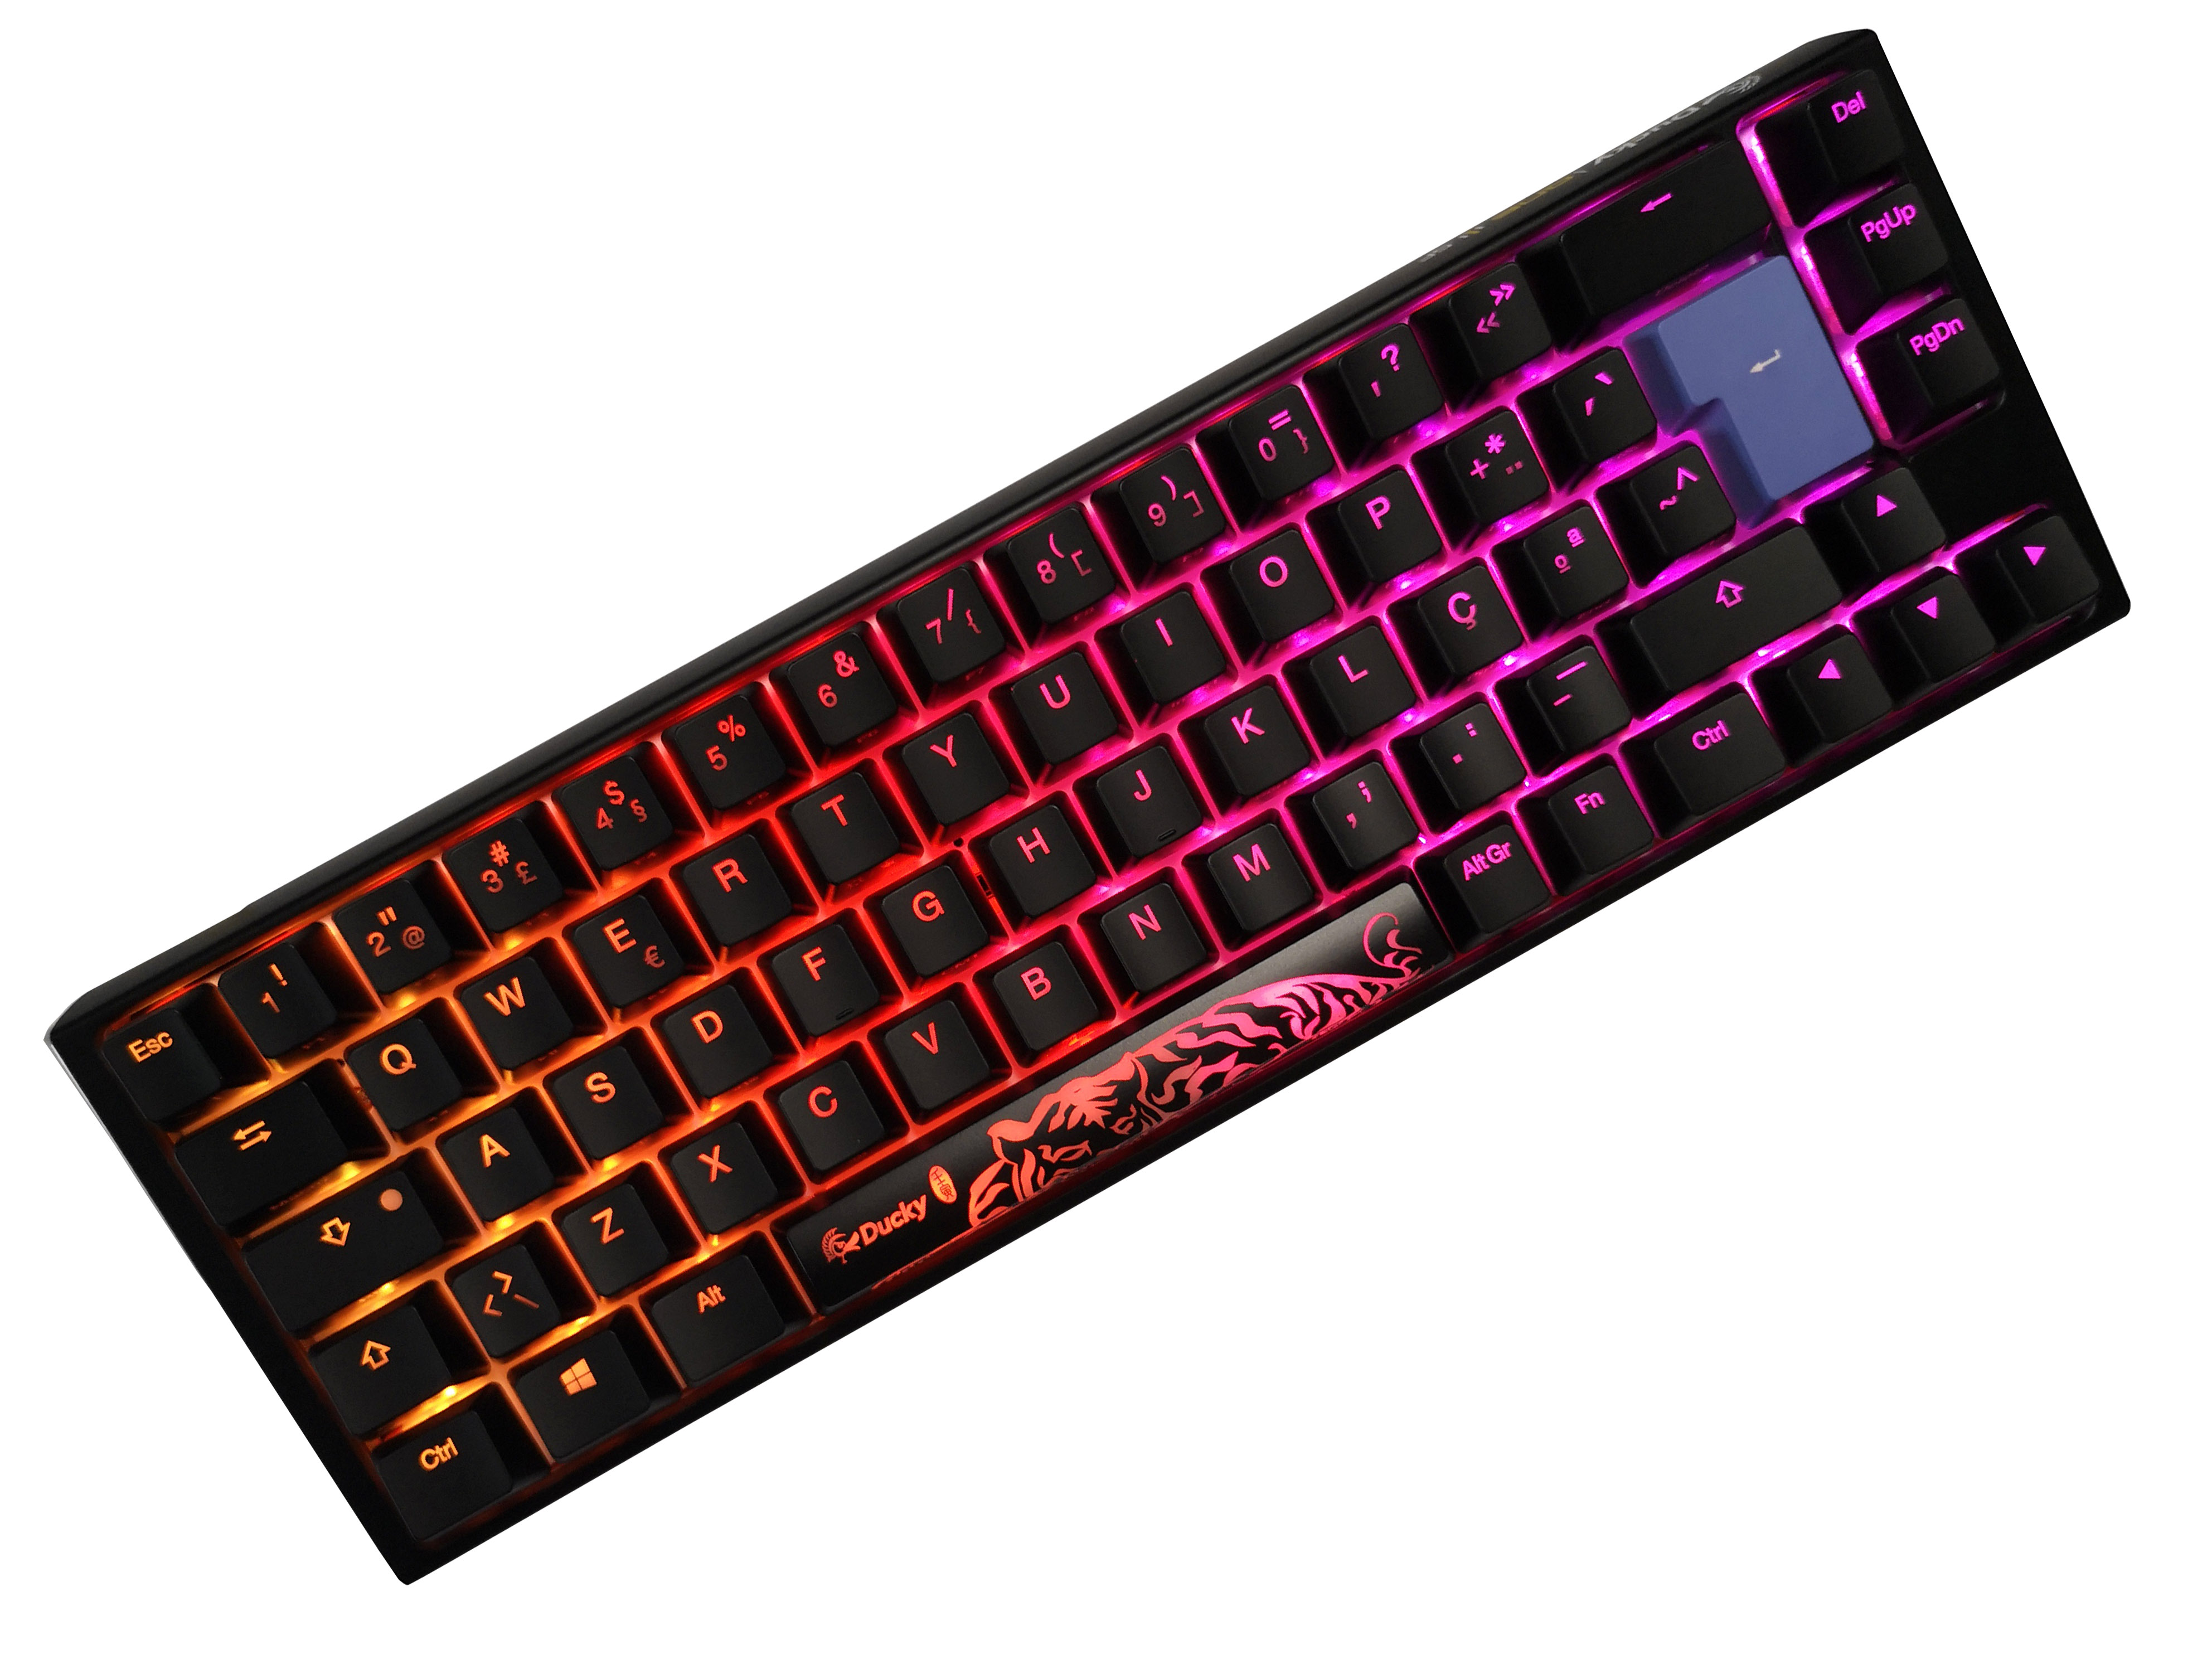 Ducky - Teclado Ducky ONE 3 Classic SF 65%, Hot-swappable, MX-Silver, RGB, PBT - Mecânico (PT)